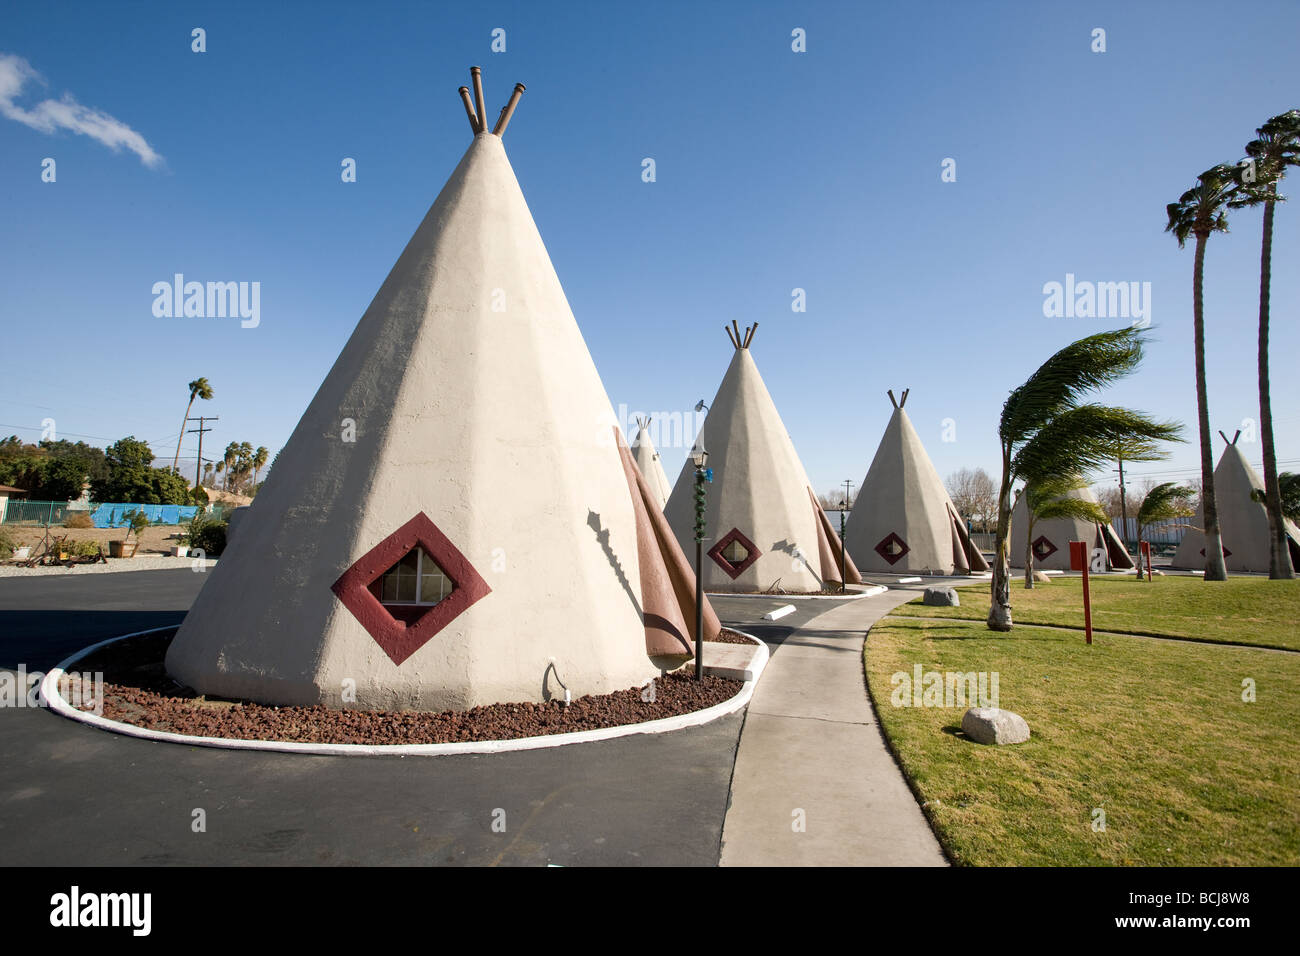 Teepee-shaped motel rooms at Wigwam Motel on Route 66 in Rialto, California. Stock Photo